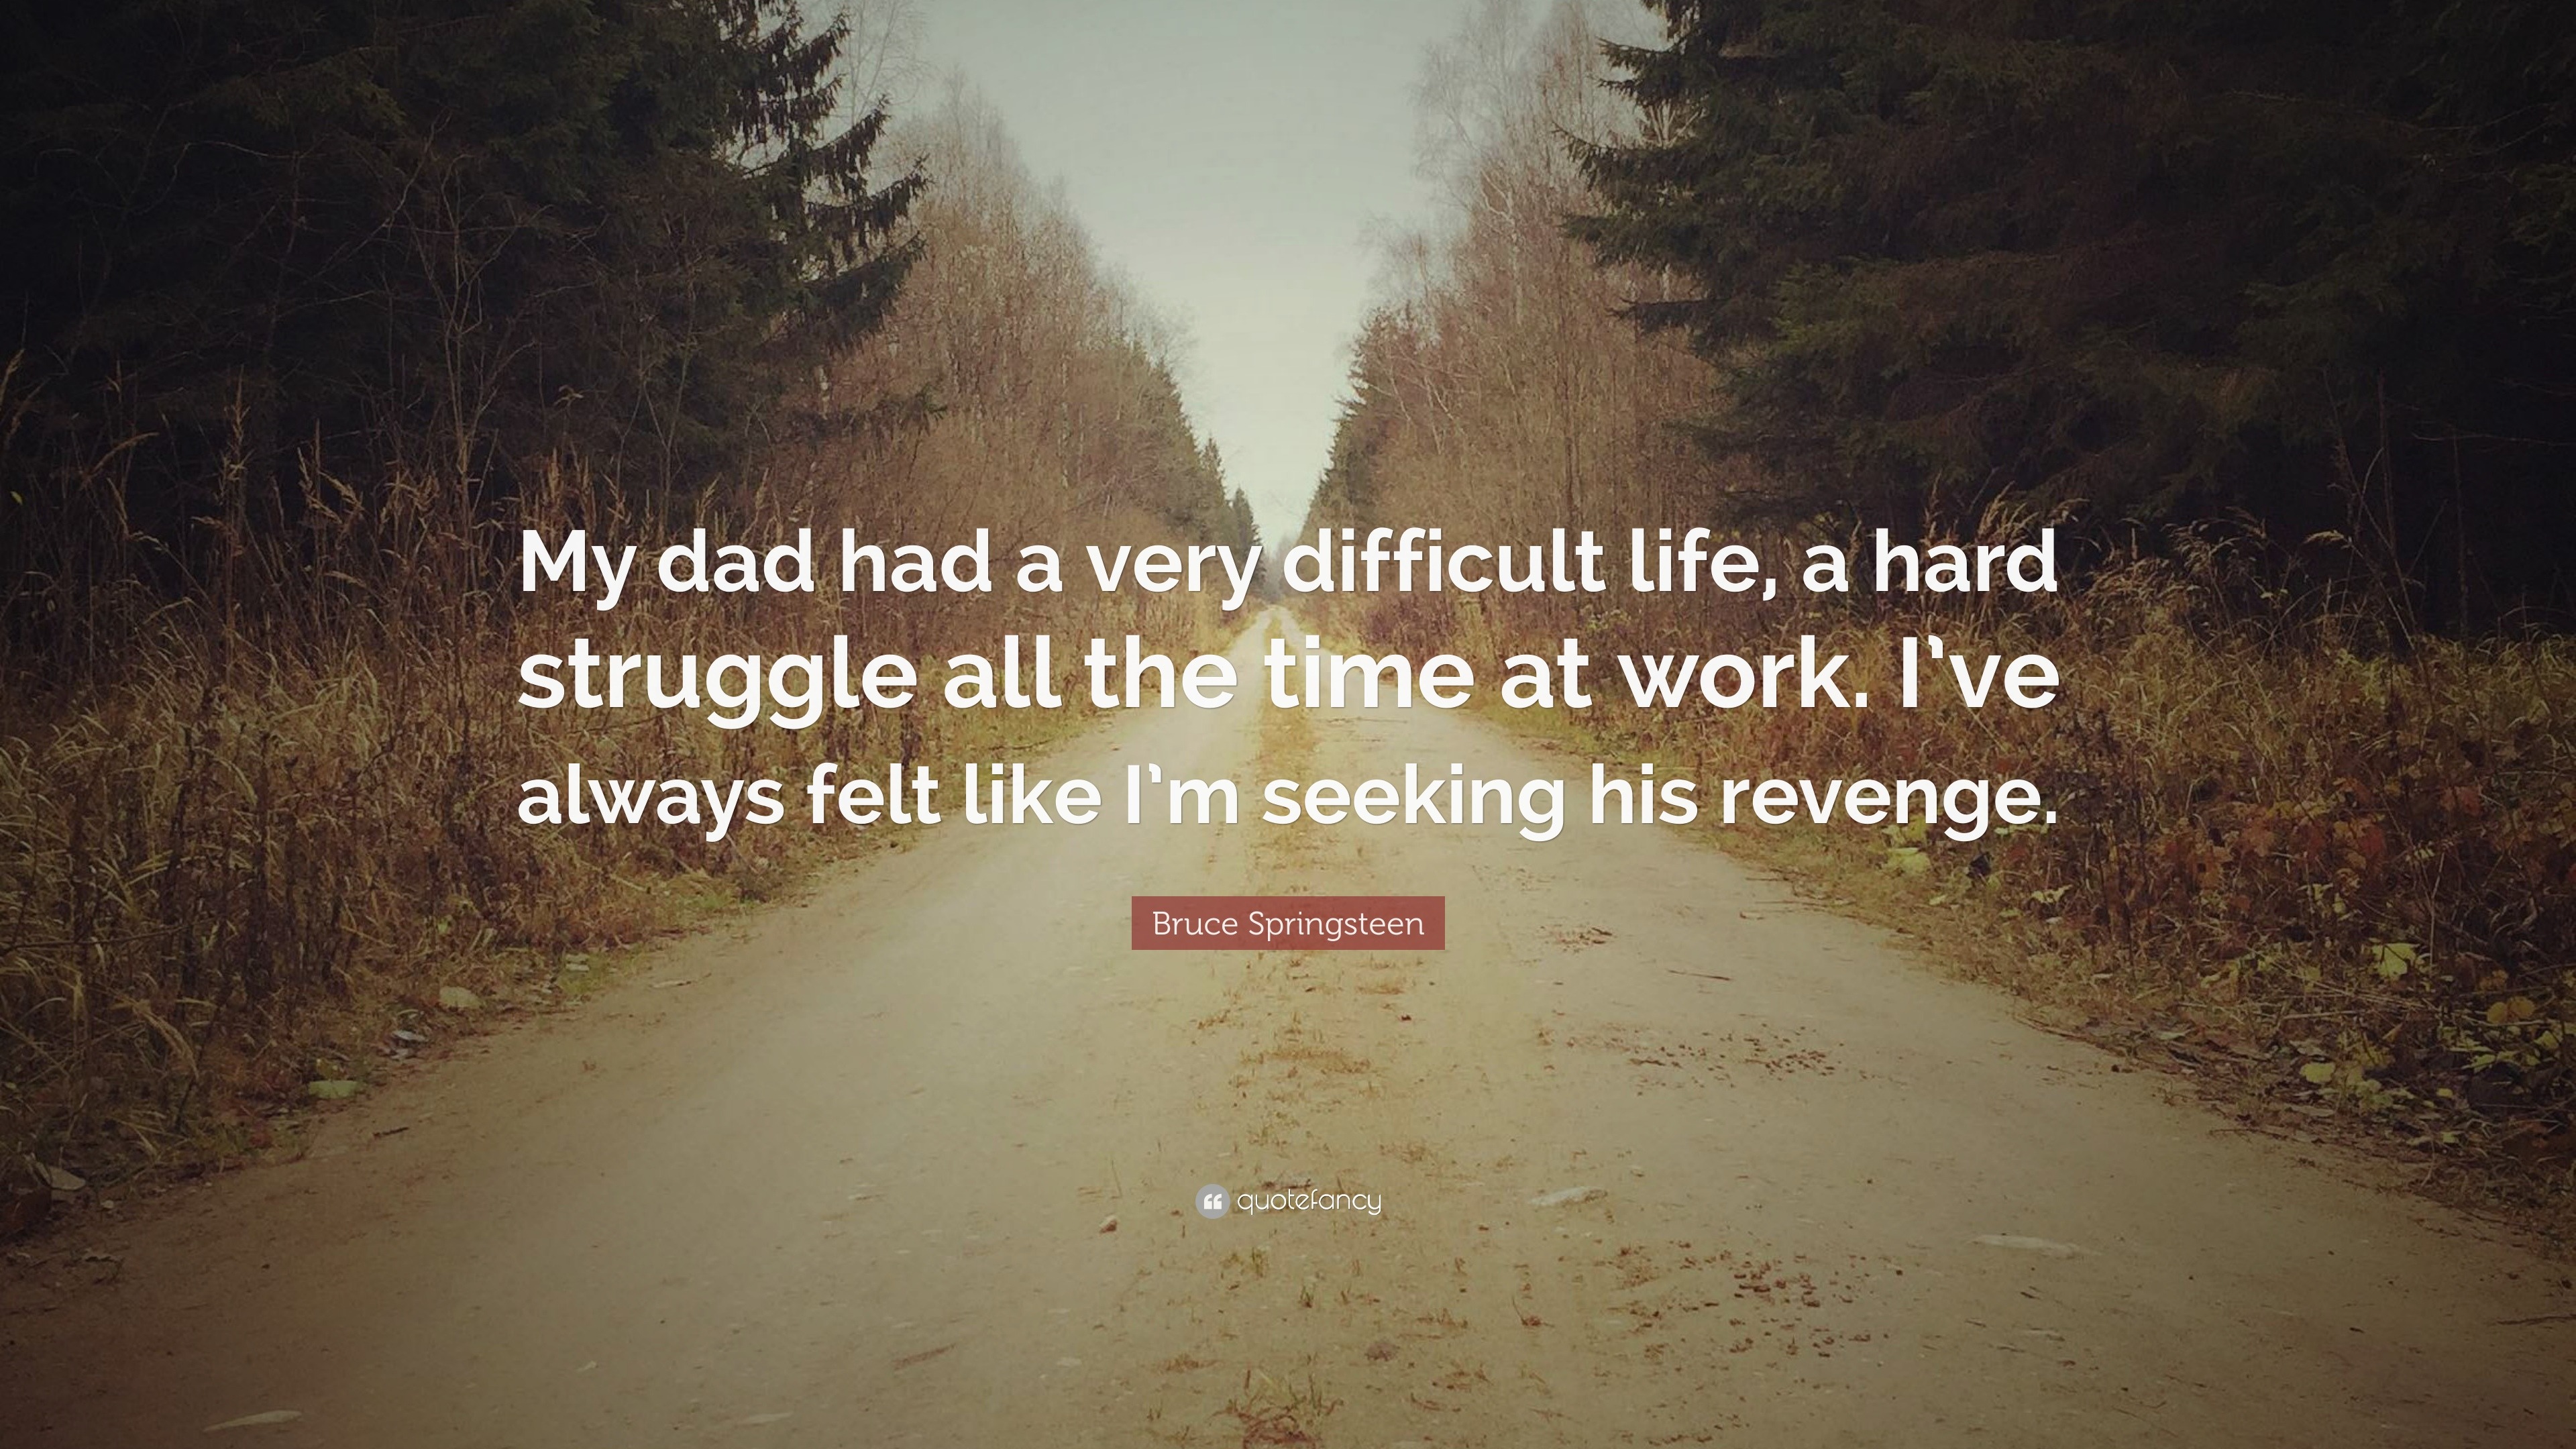 Bruce Springsteen Quote “My dad had a very difficult life a hard struggle